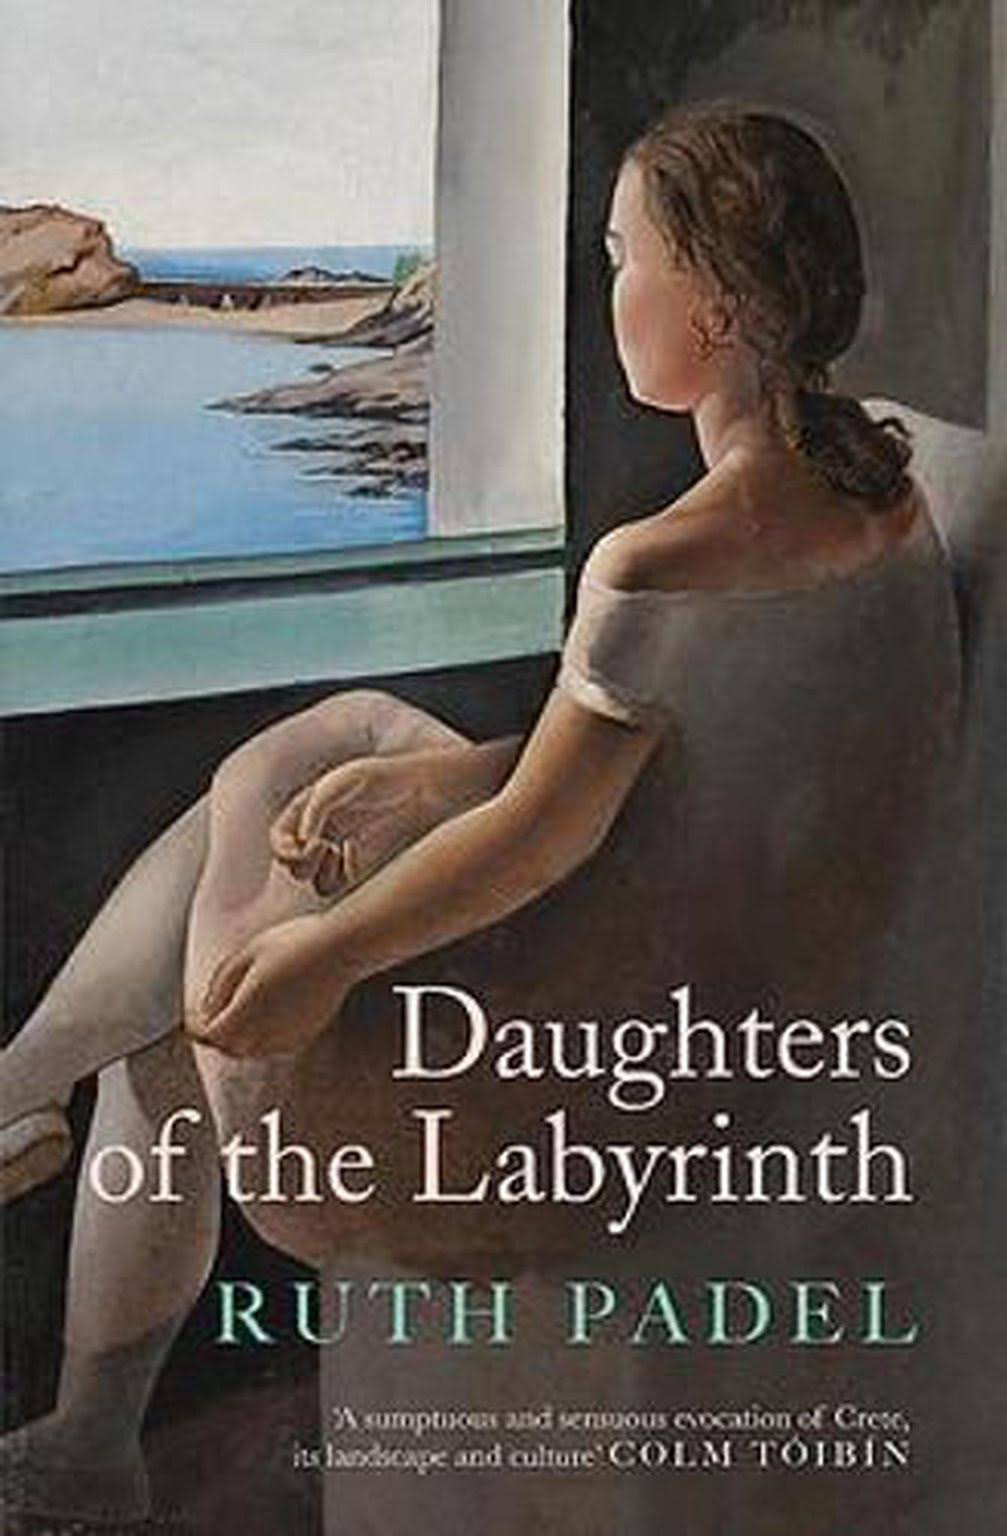 Daughters of the Labyrinth [Book]